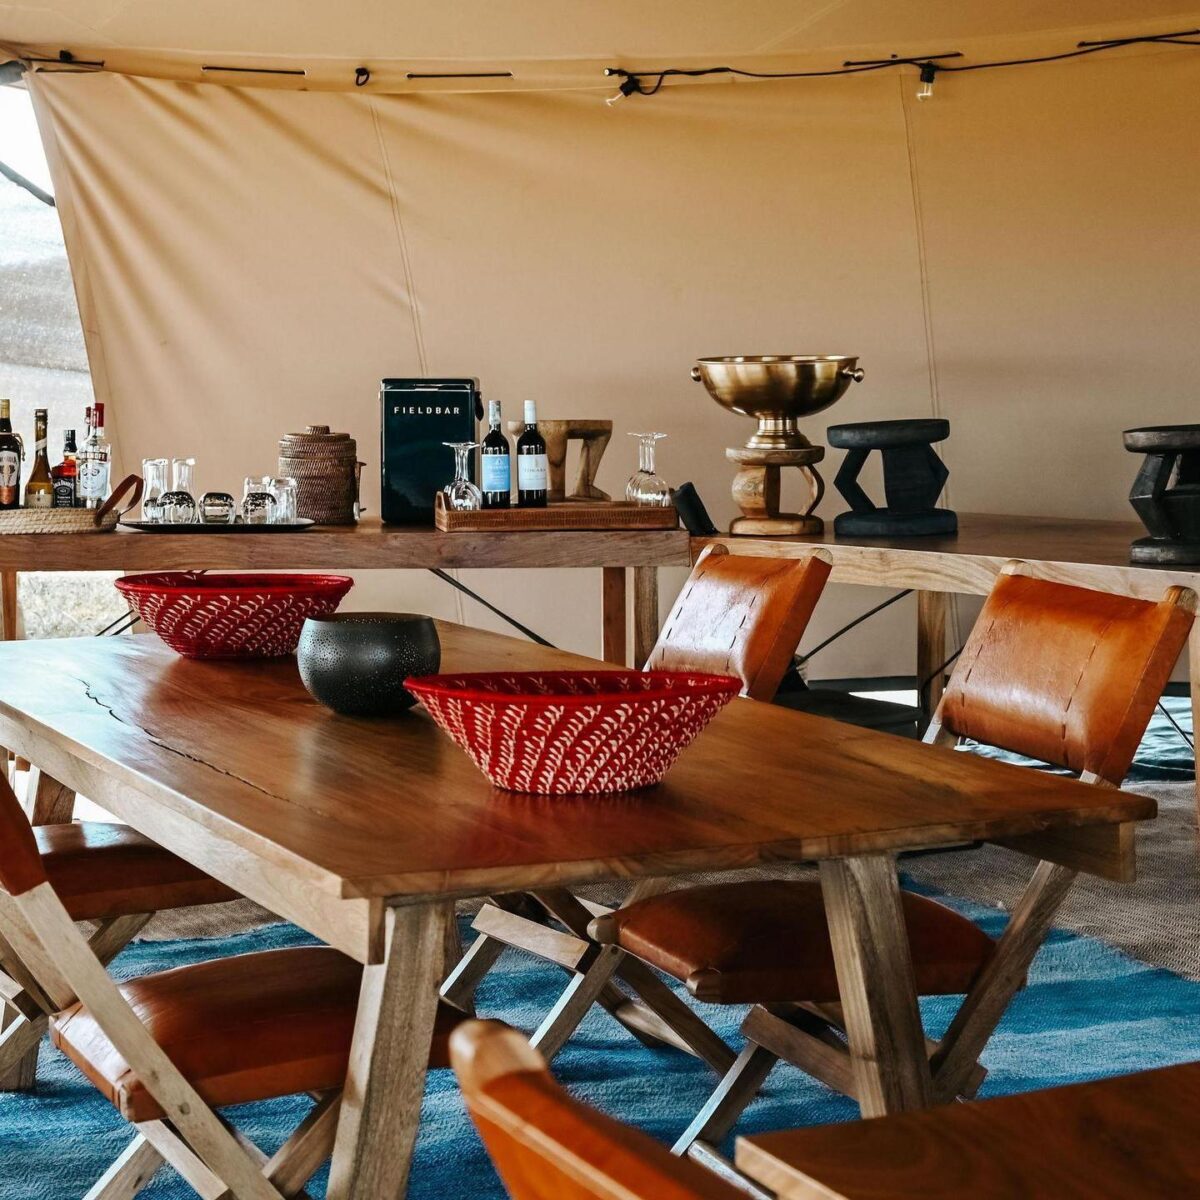 Usawa camp dining area with wooden furniture